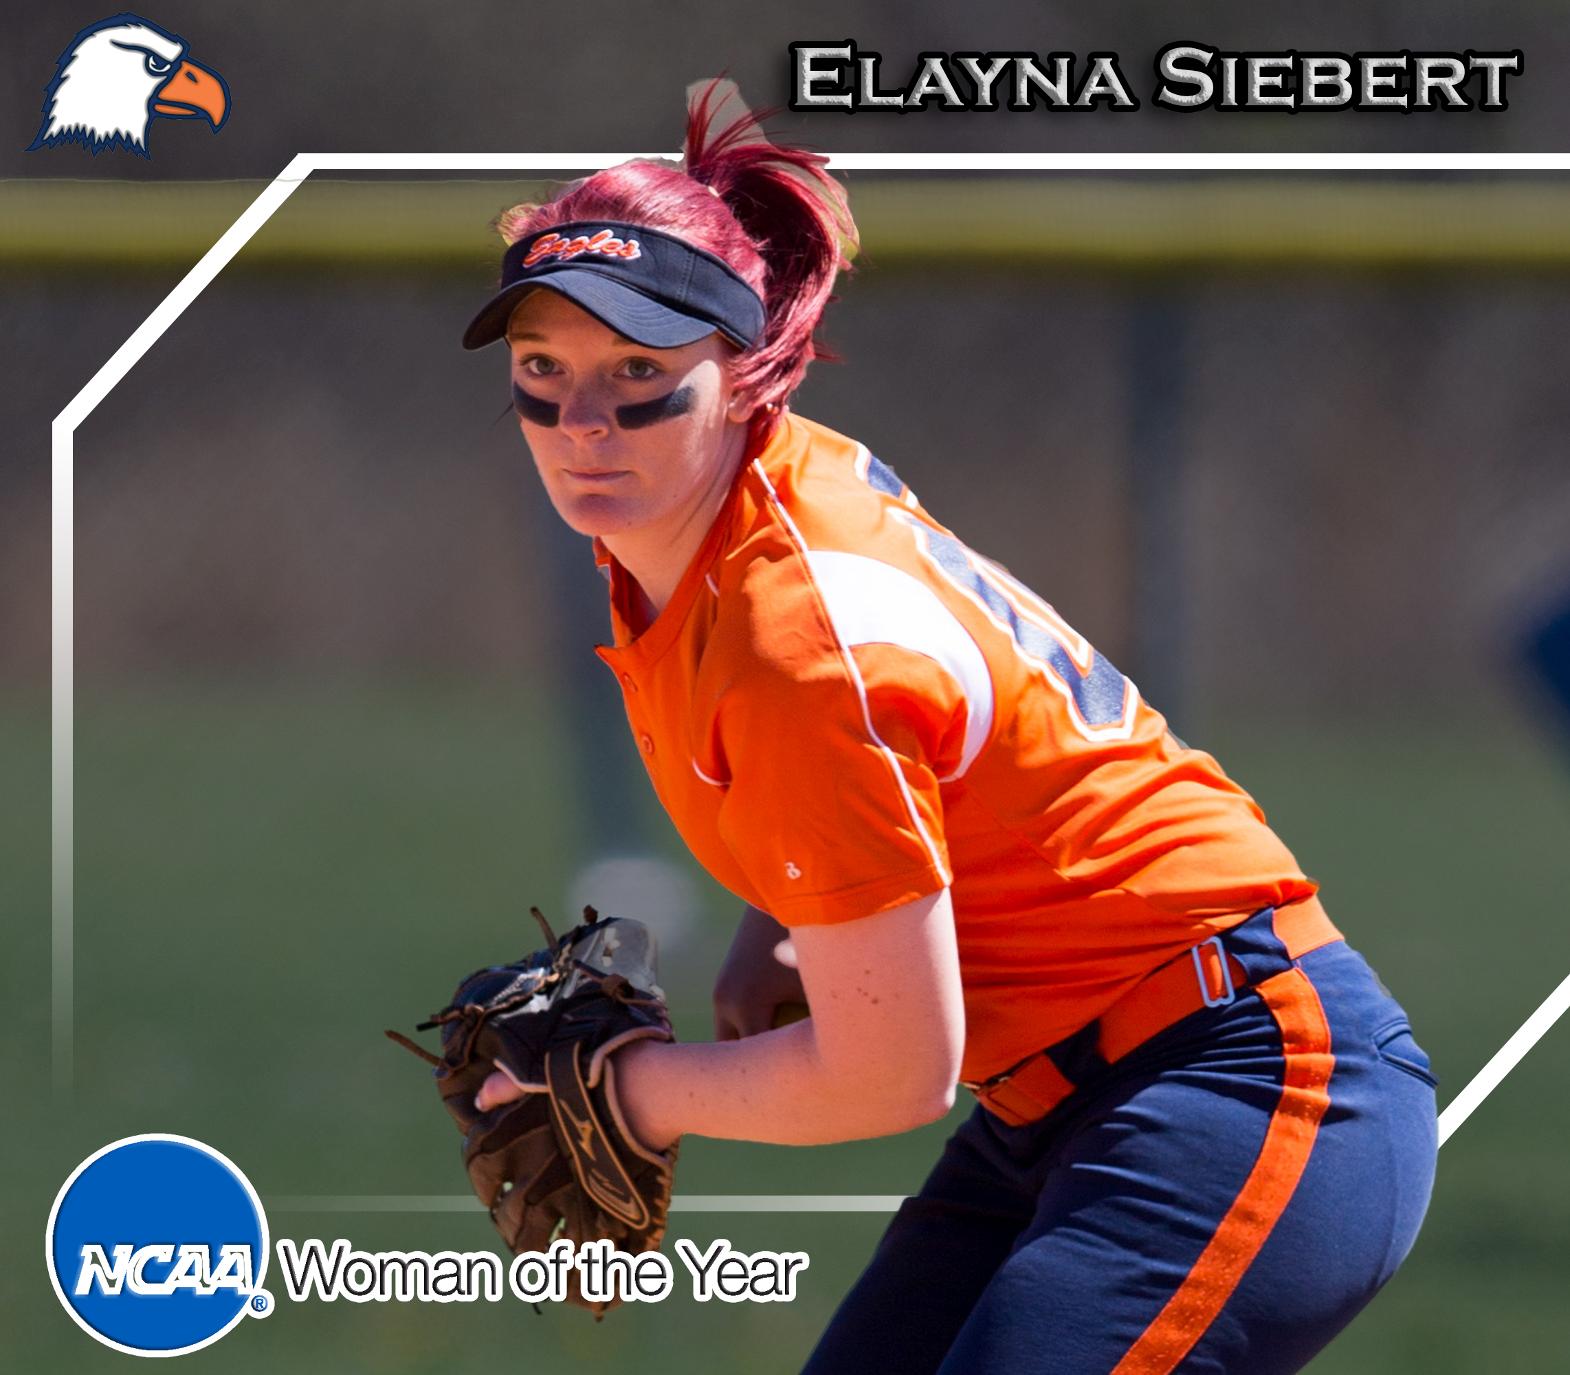 Siebert advances to top 30 for NCAA Woman of the Year